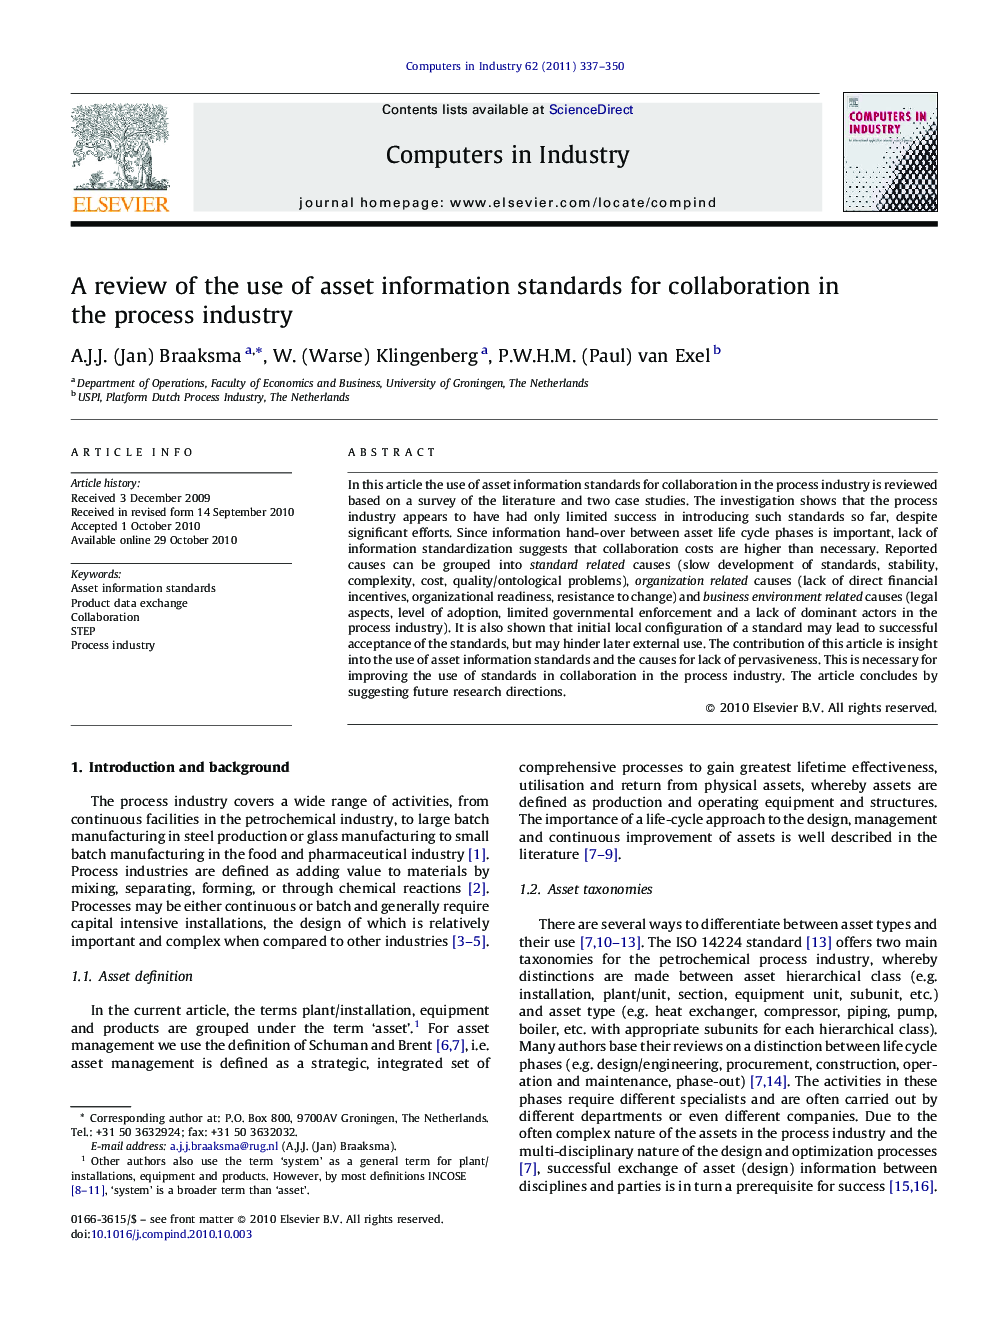 A review of the use of asset information standards for collaboration in the process industry